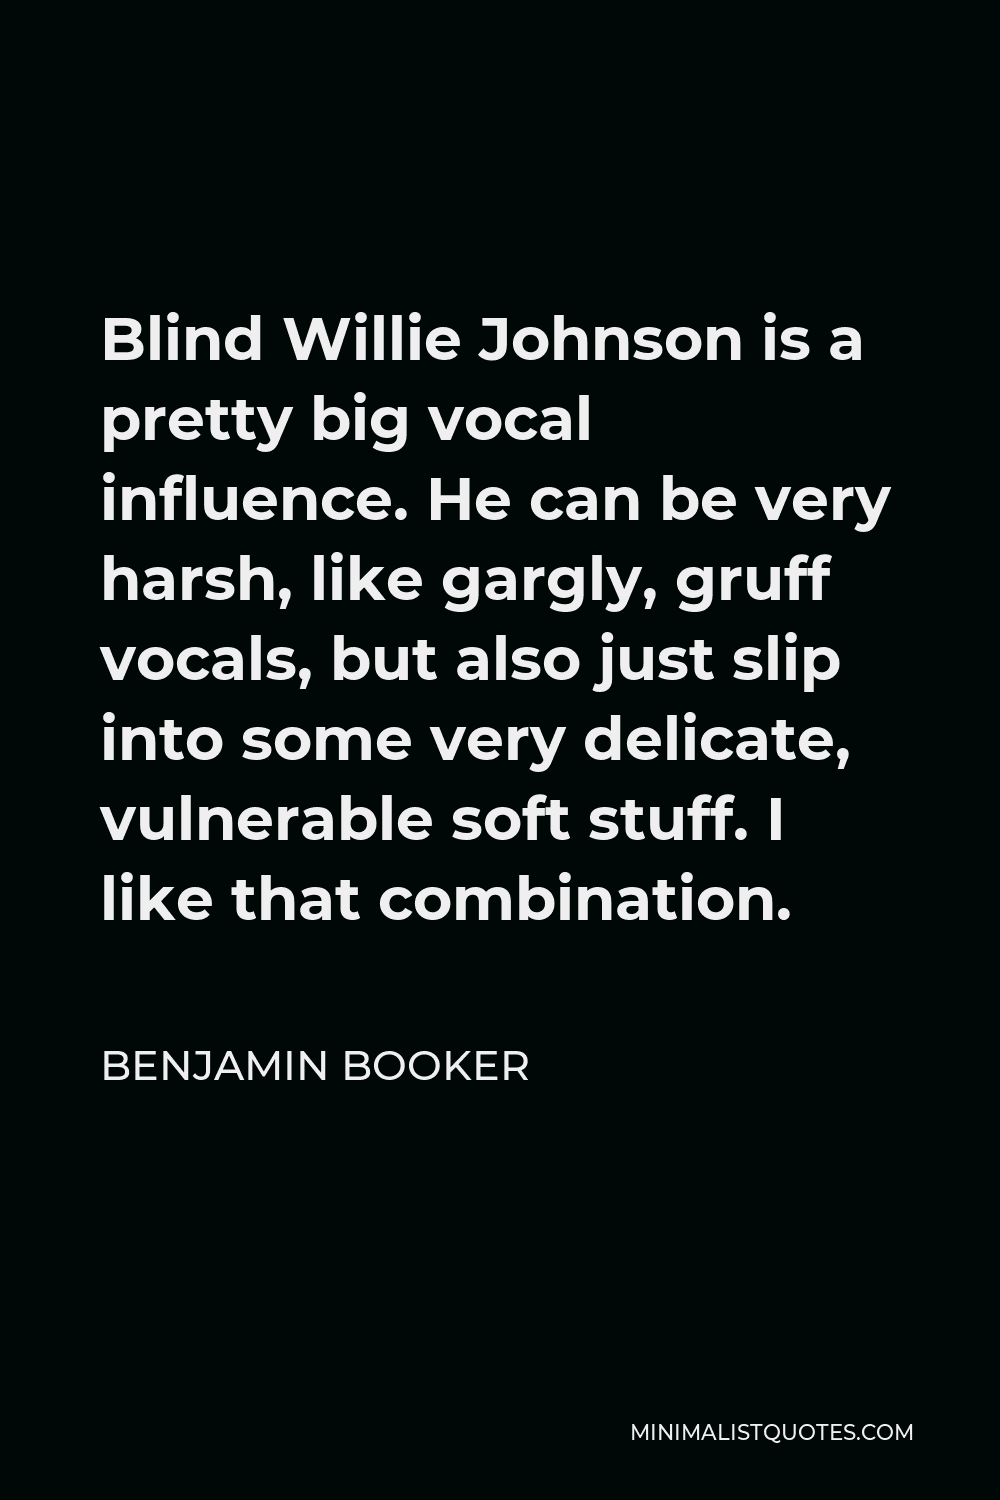 Benjamin Booker Quote - Blind Willie Johnson is a pretty big vocal influence. He can be very harsh, like gargly, gruff vocals, but also just slip into some very delicate, vulnerable soft stuff. I like that combination.